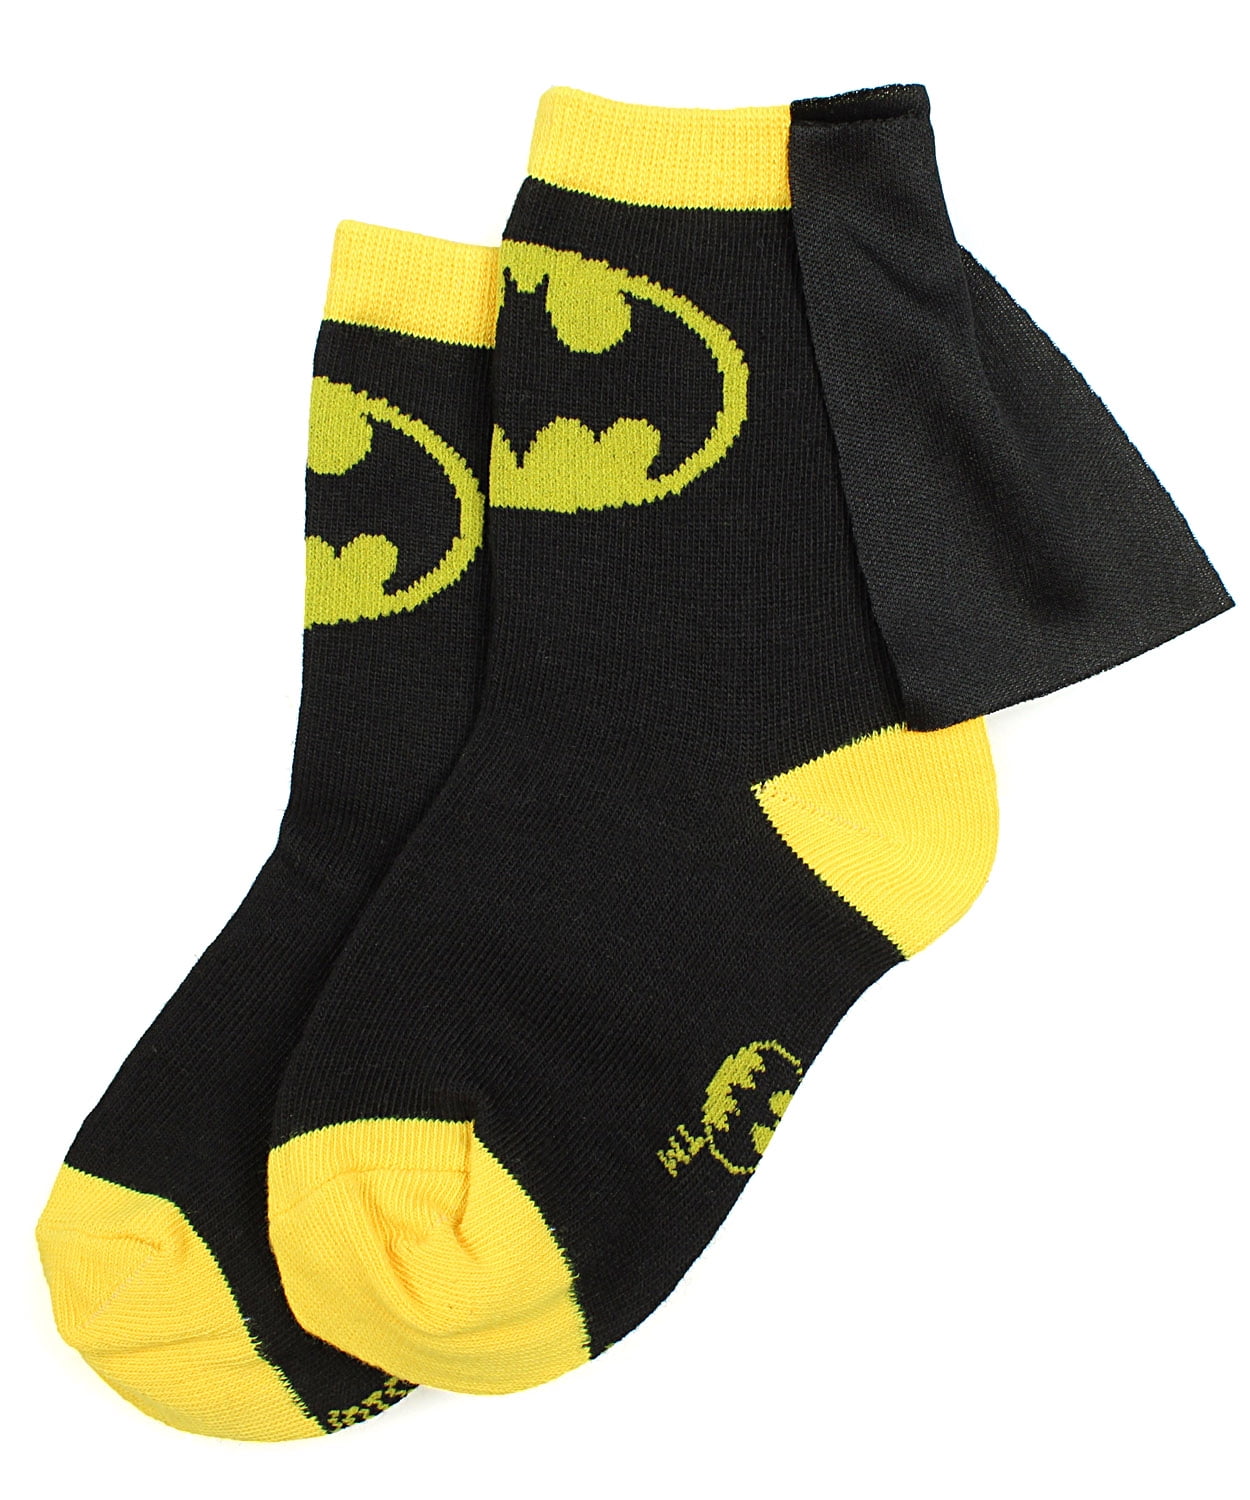 Batman Justice League Baby Toddler Boy's 6 pack Athletic Crew Socks 